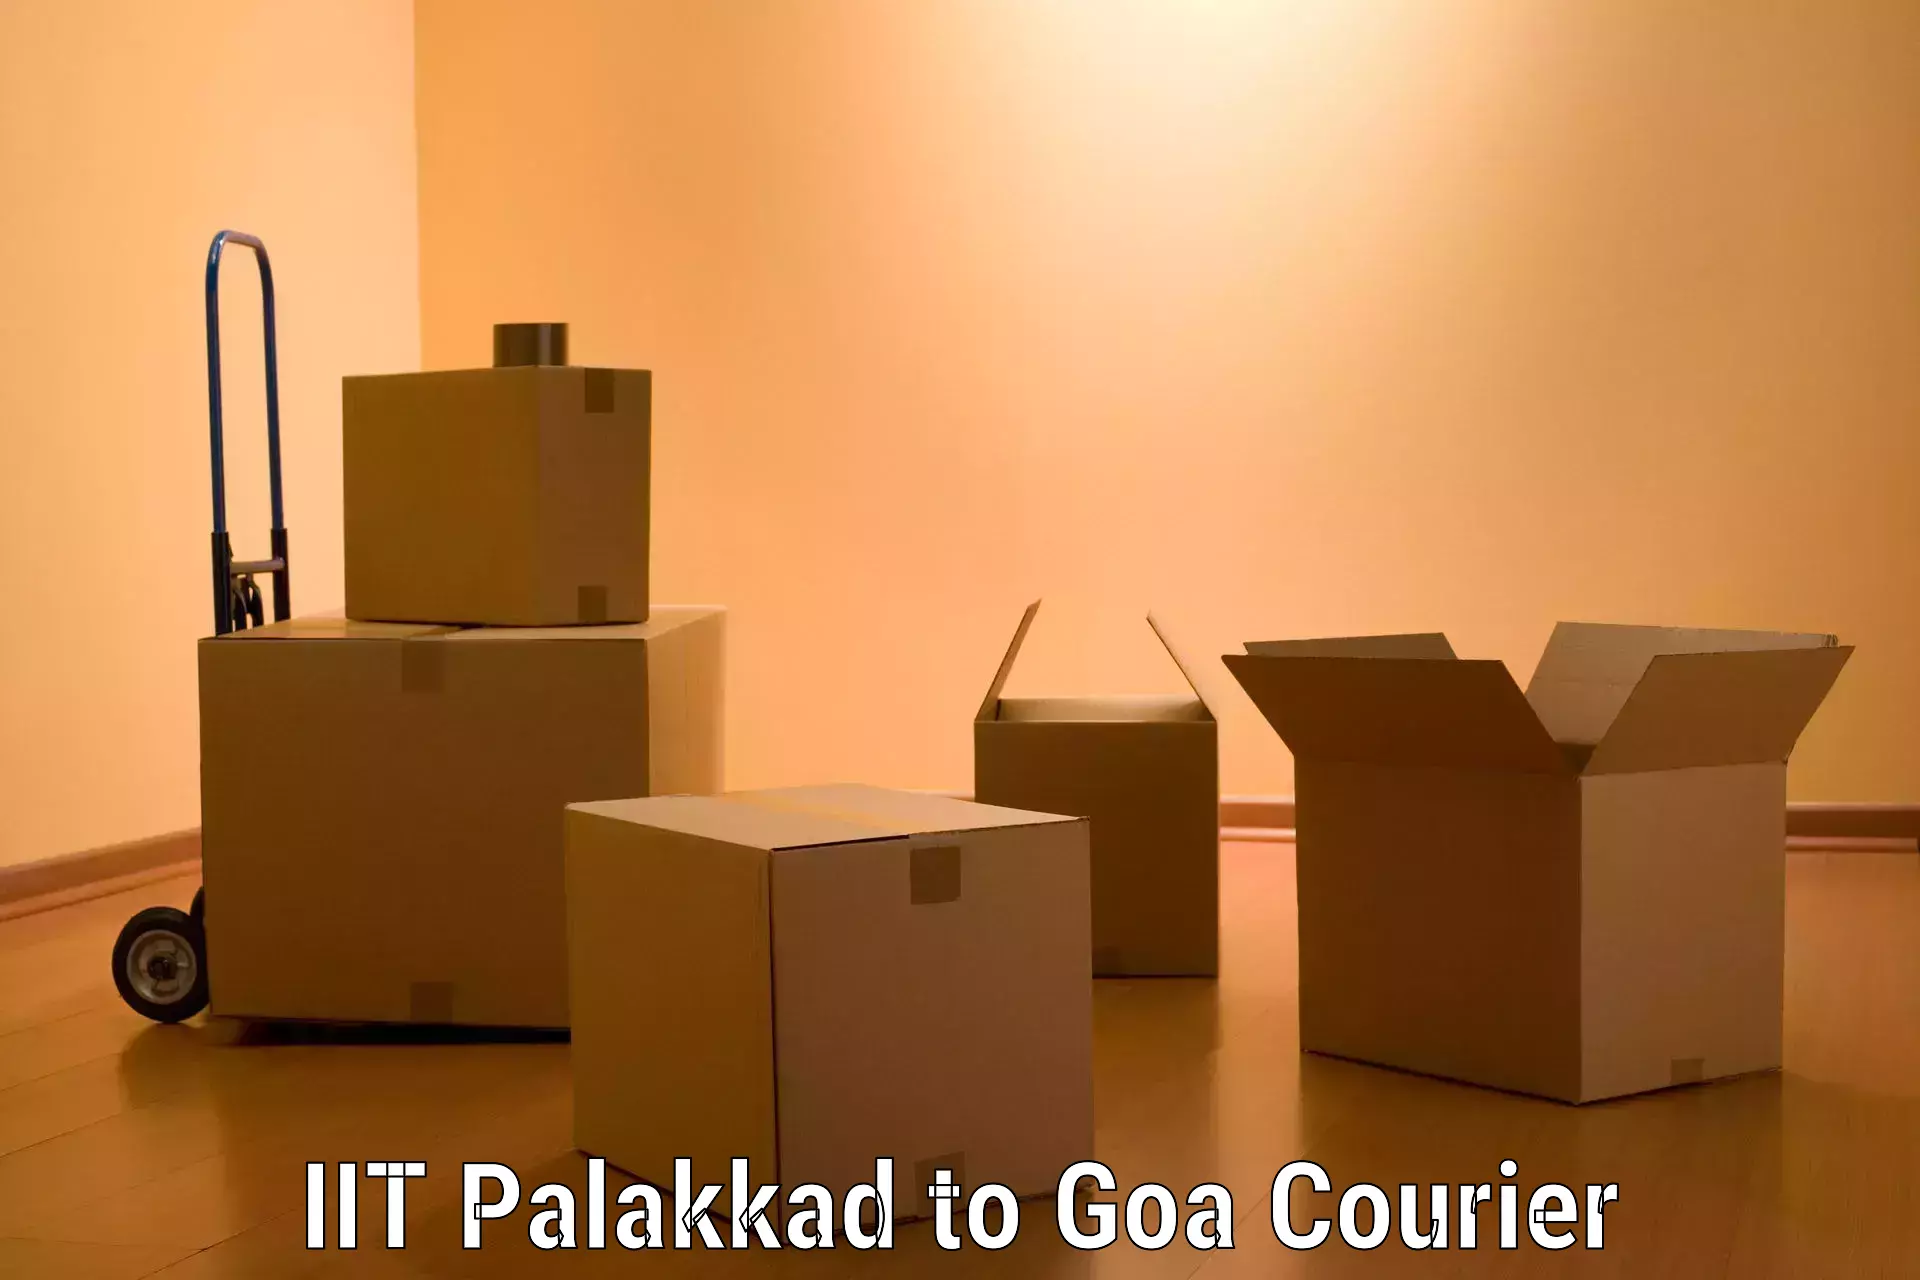 Quality relocation assistance IIT Palakkad to Goa